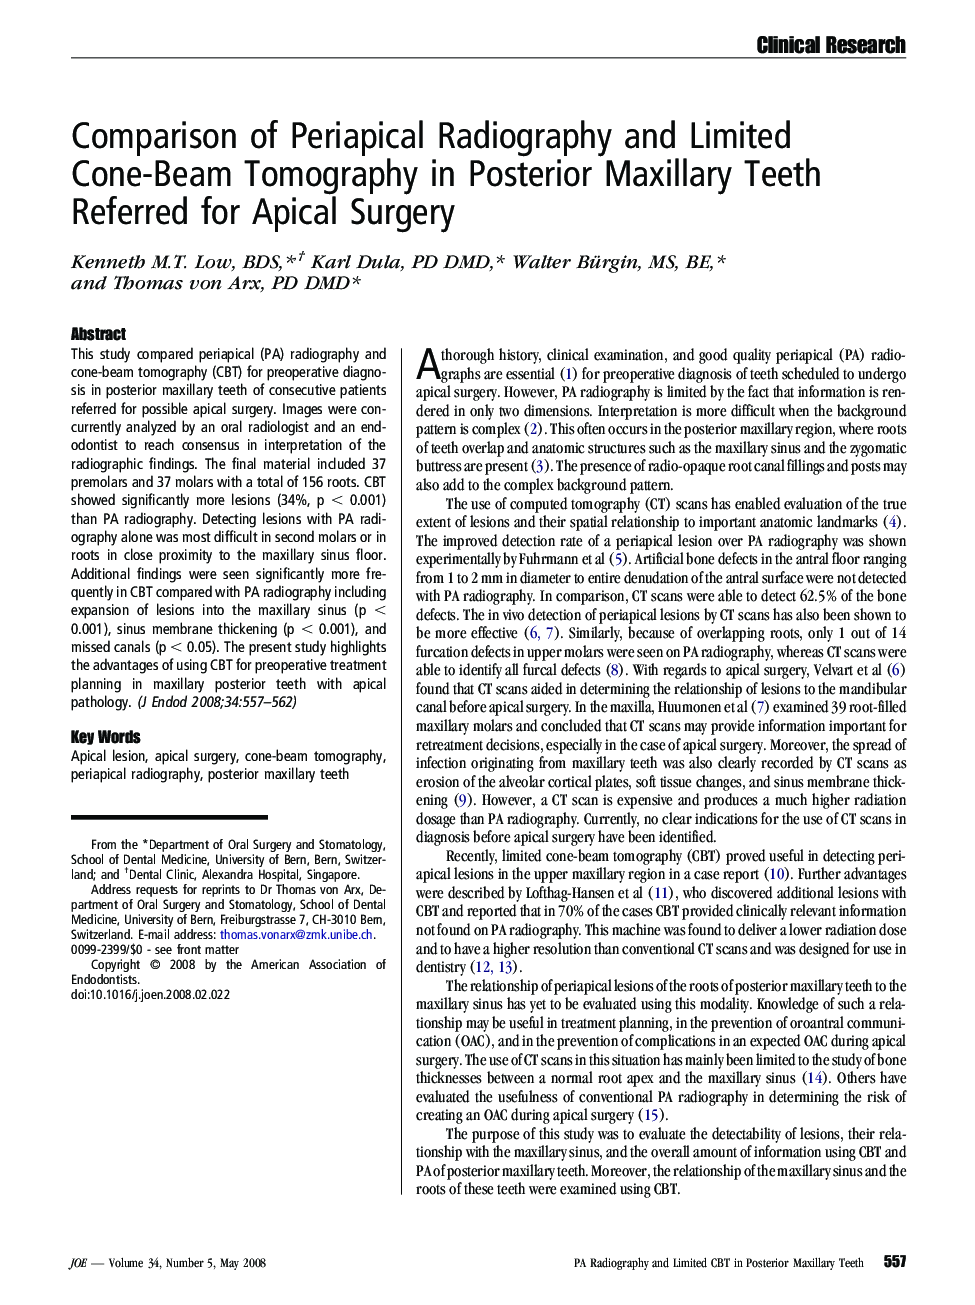 Comparison of Periapical Radiography and Limited Cone-Beam Tomography in Posterior Maxillary Teeth Referred for Apical Surgery